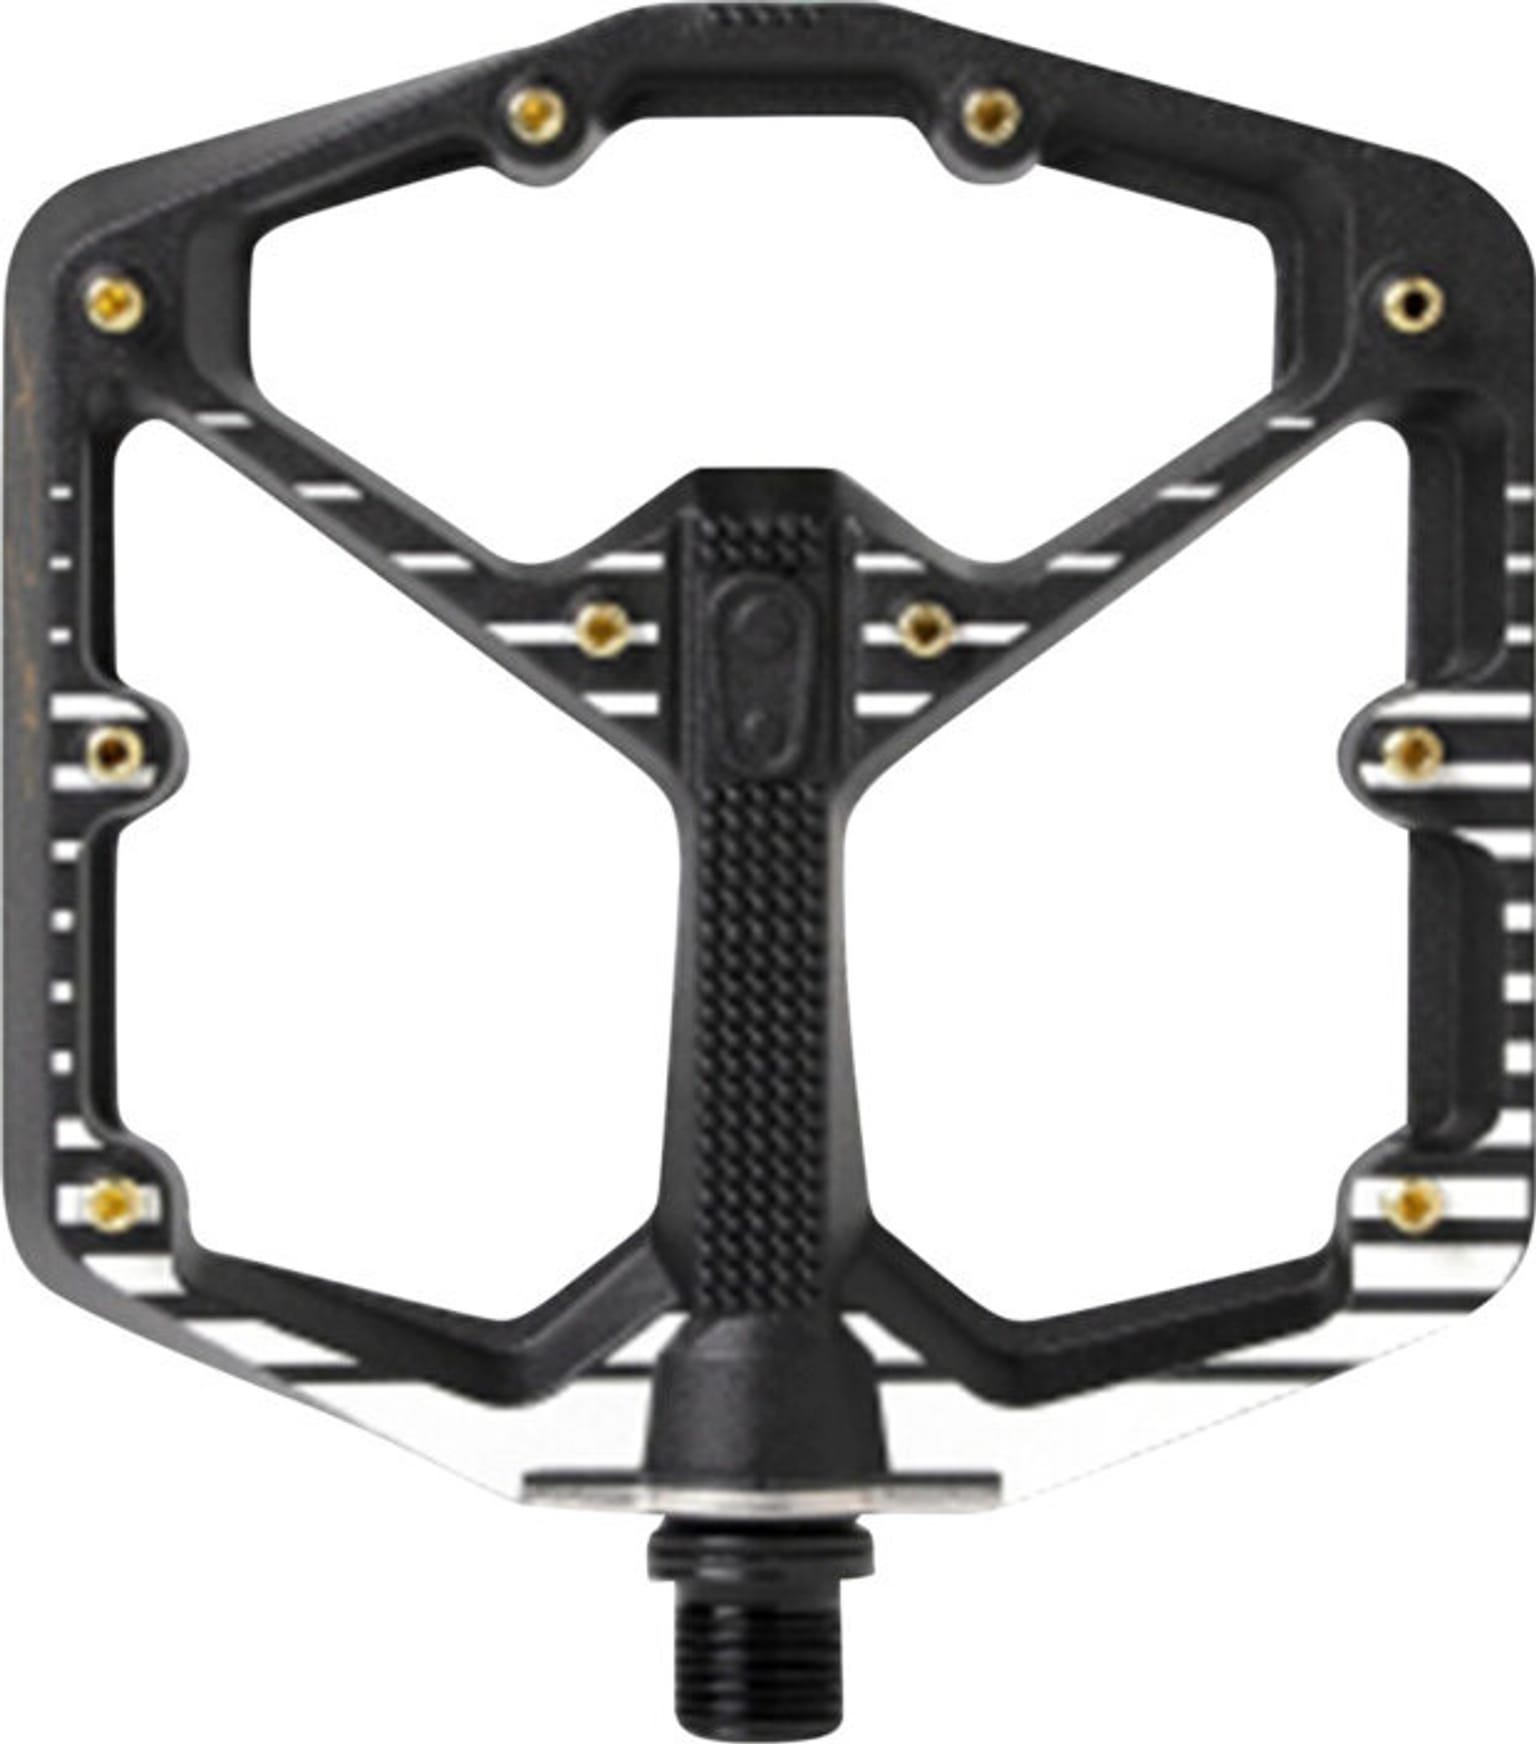 crankbrothers crankbrothers Pedal Stamp 7 large Fabio Wibmer Signature Edition Pedale schwarz 2